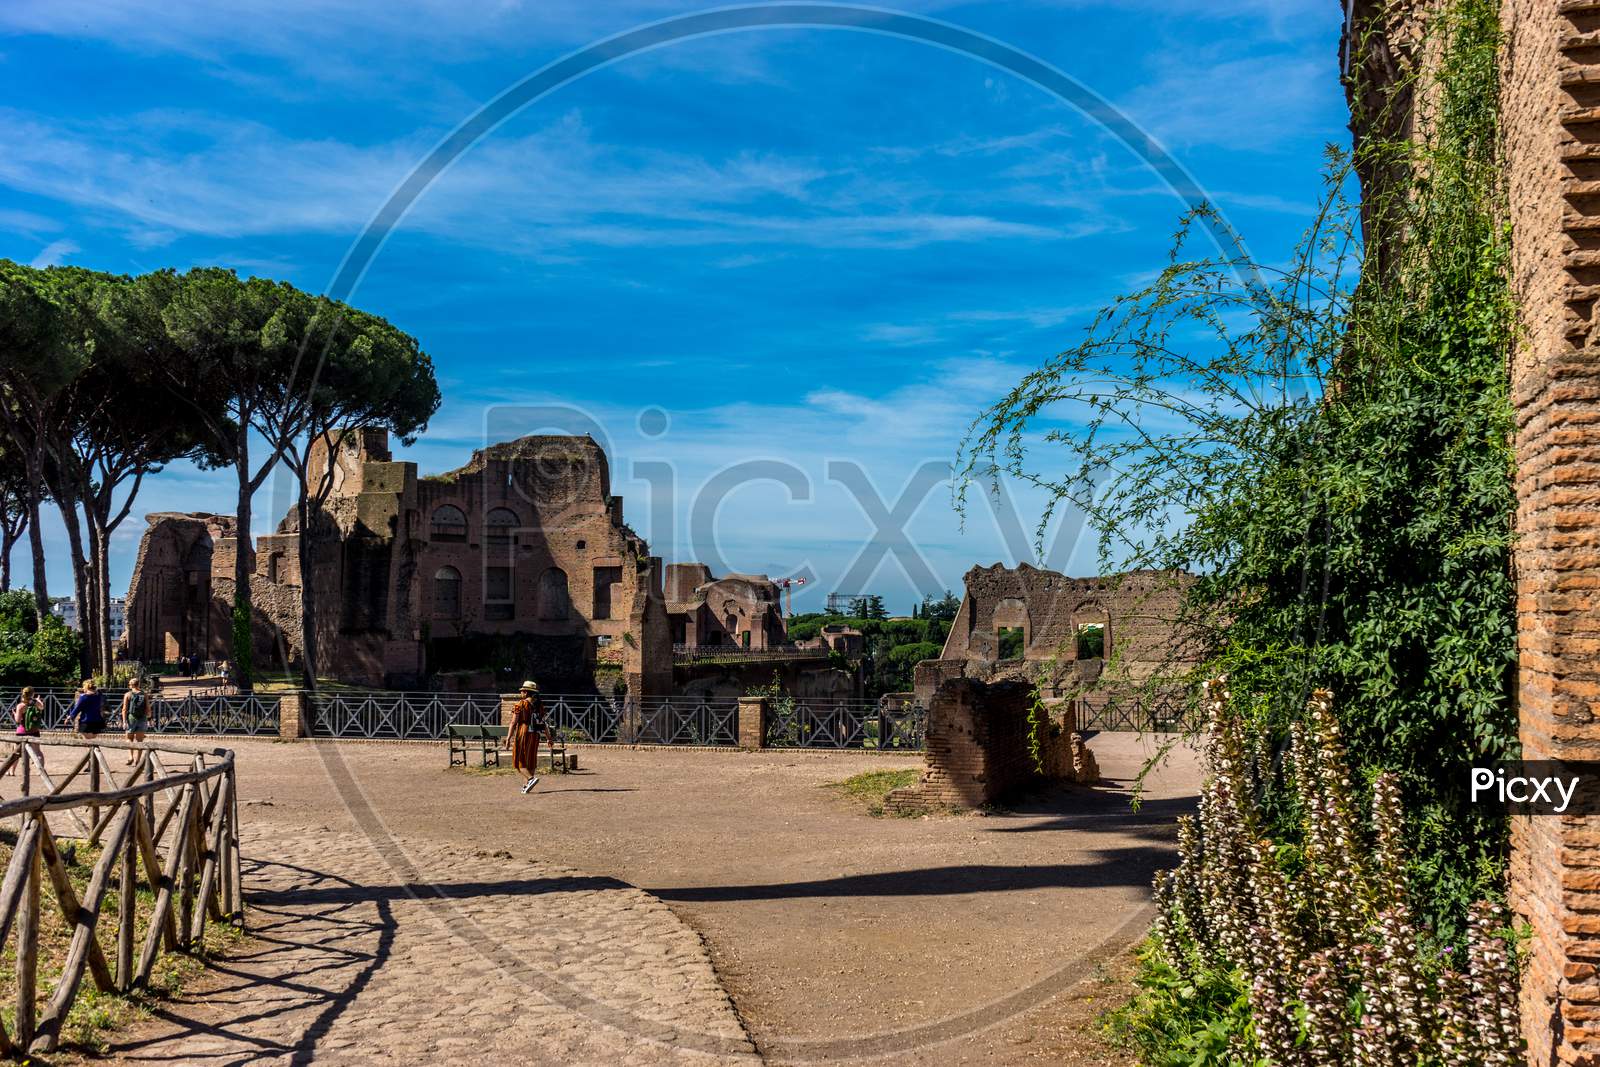 Rome, Italy - 24 June 2018: The Ancient Ruins At The Roman Forum In Rome. Famous World Landmark